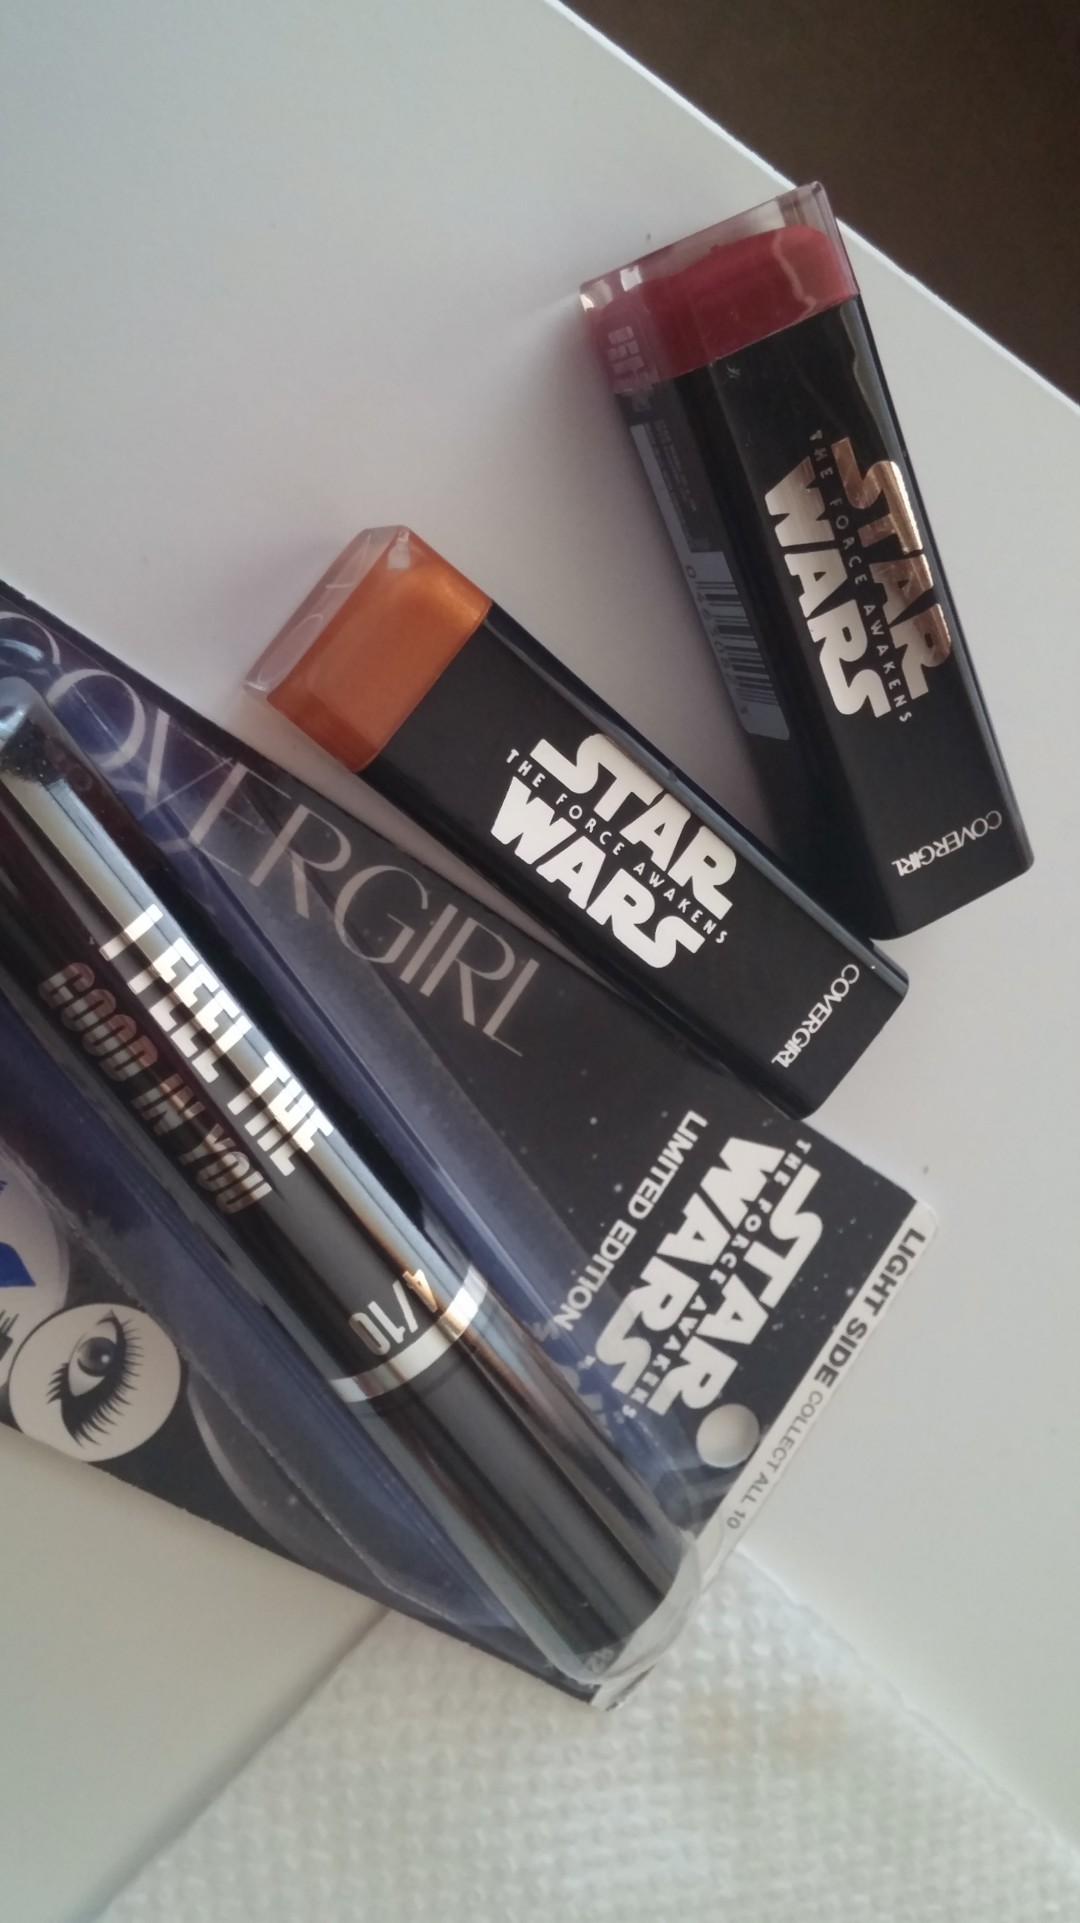 Oh check these ouuuut! The light side mascara and it's waterproof too just in case you have to sob after your apprentice turns dark. You never know.